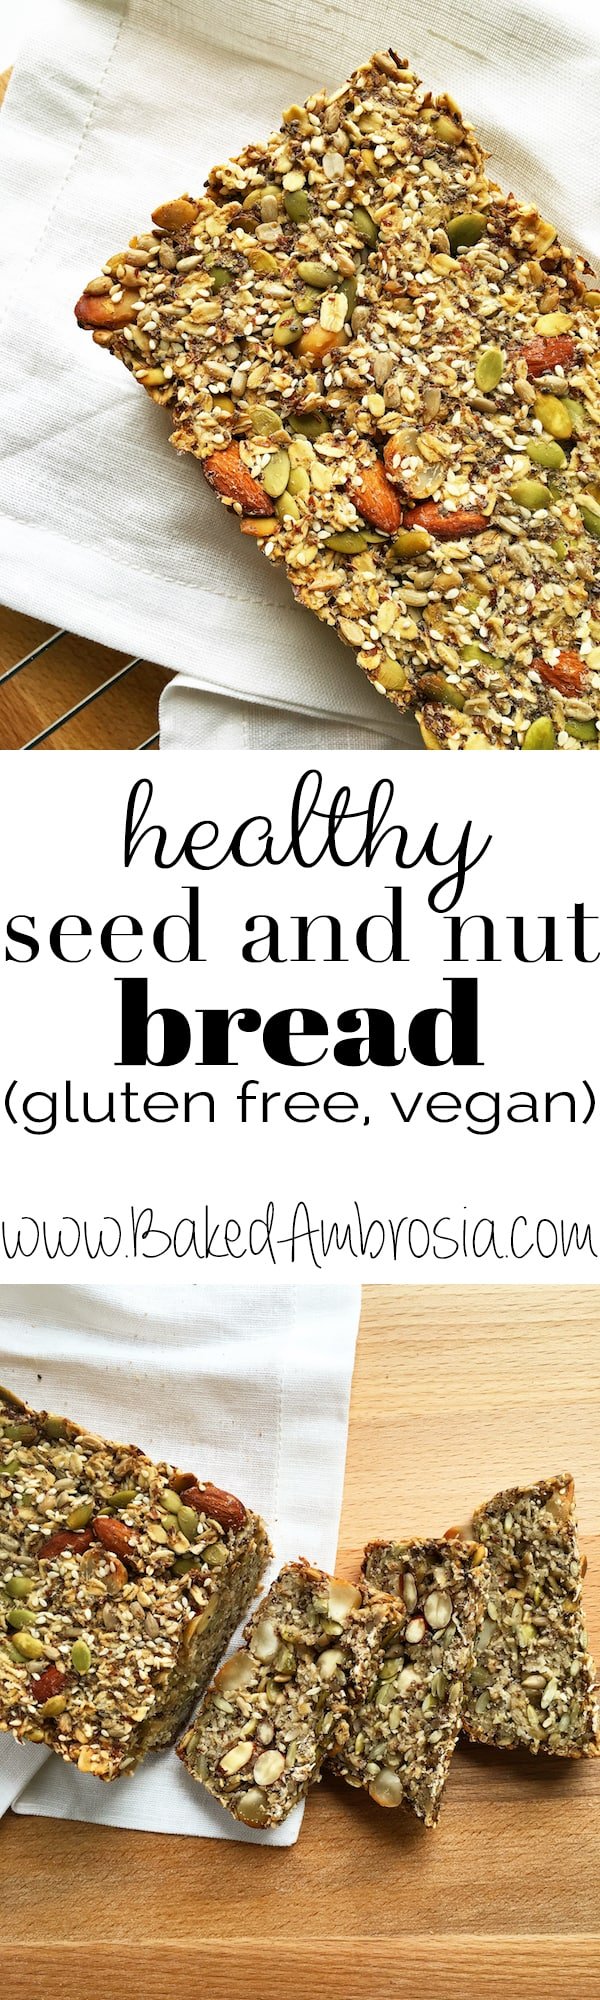 Healthy Seed and Nut Bread (gluten free, vegan)